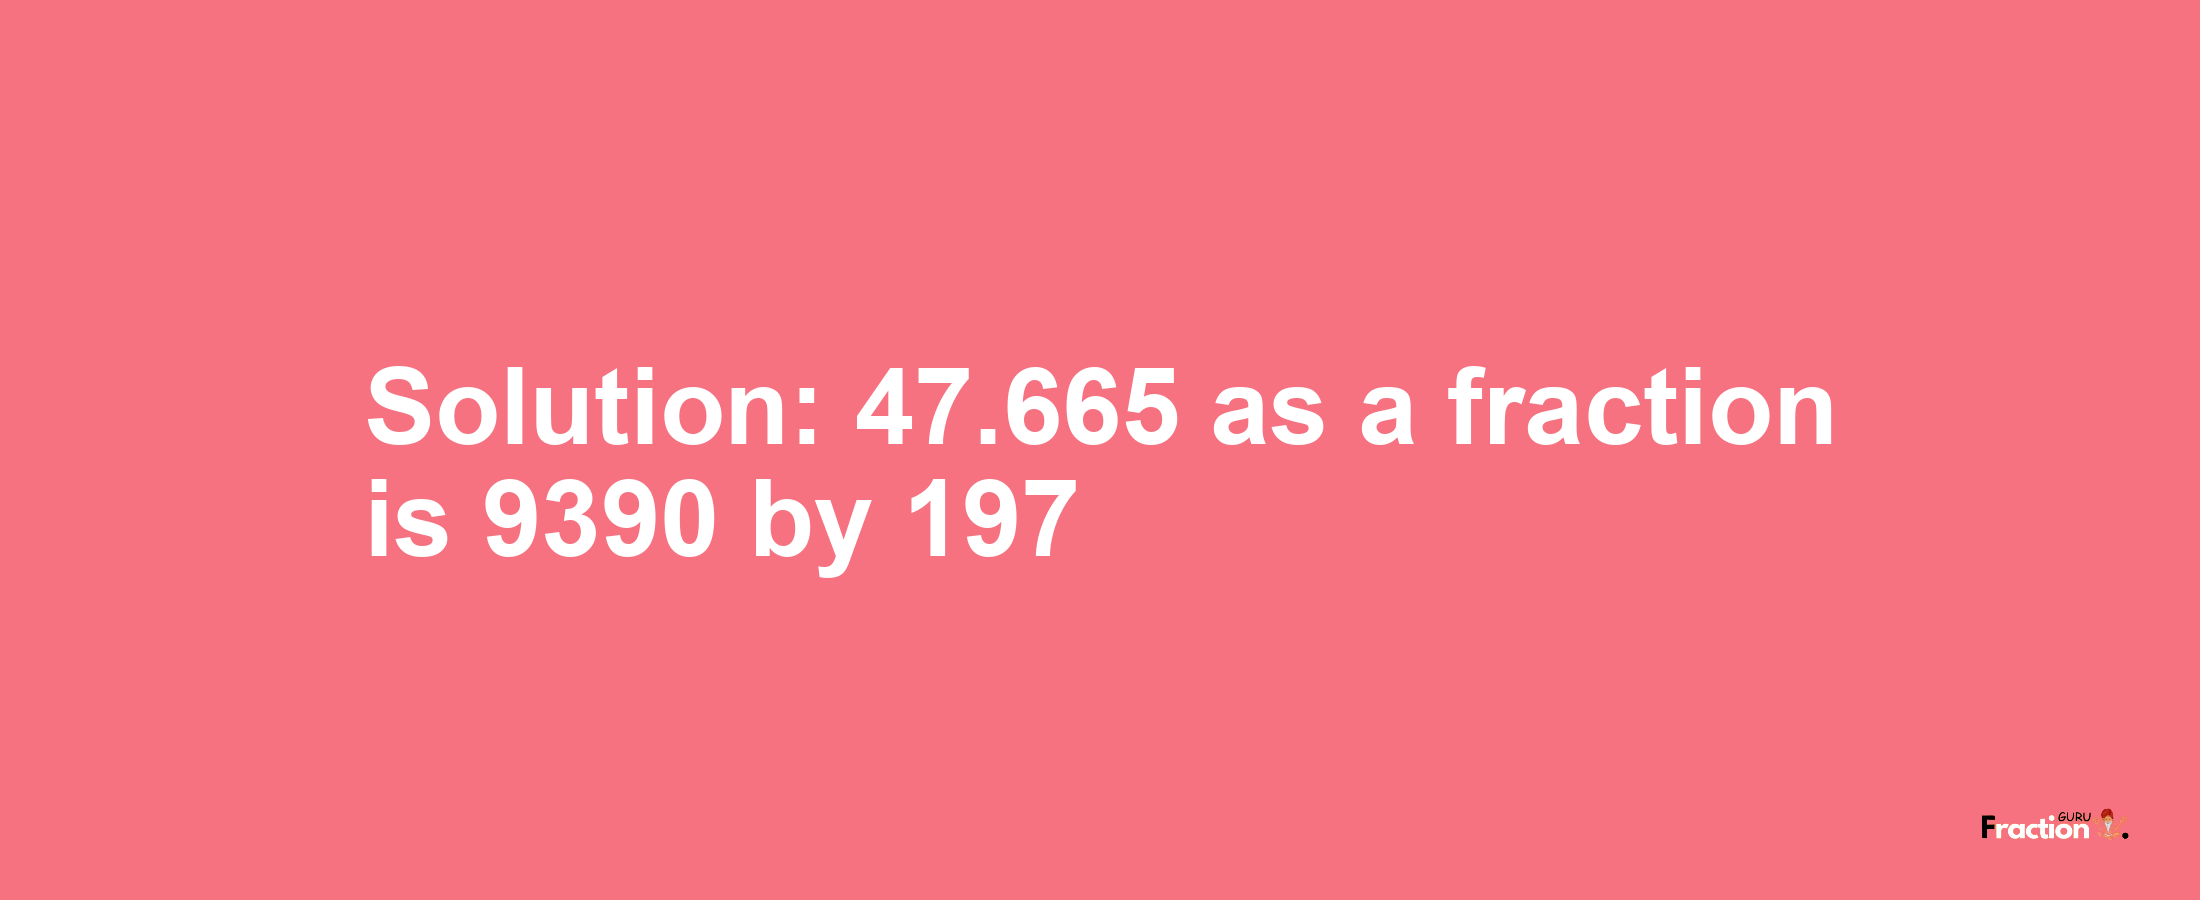 Solution:47.665 as a fraction is 9390/197